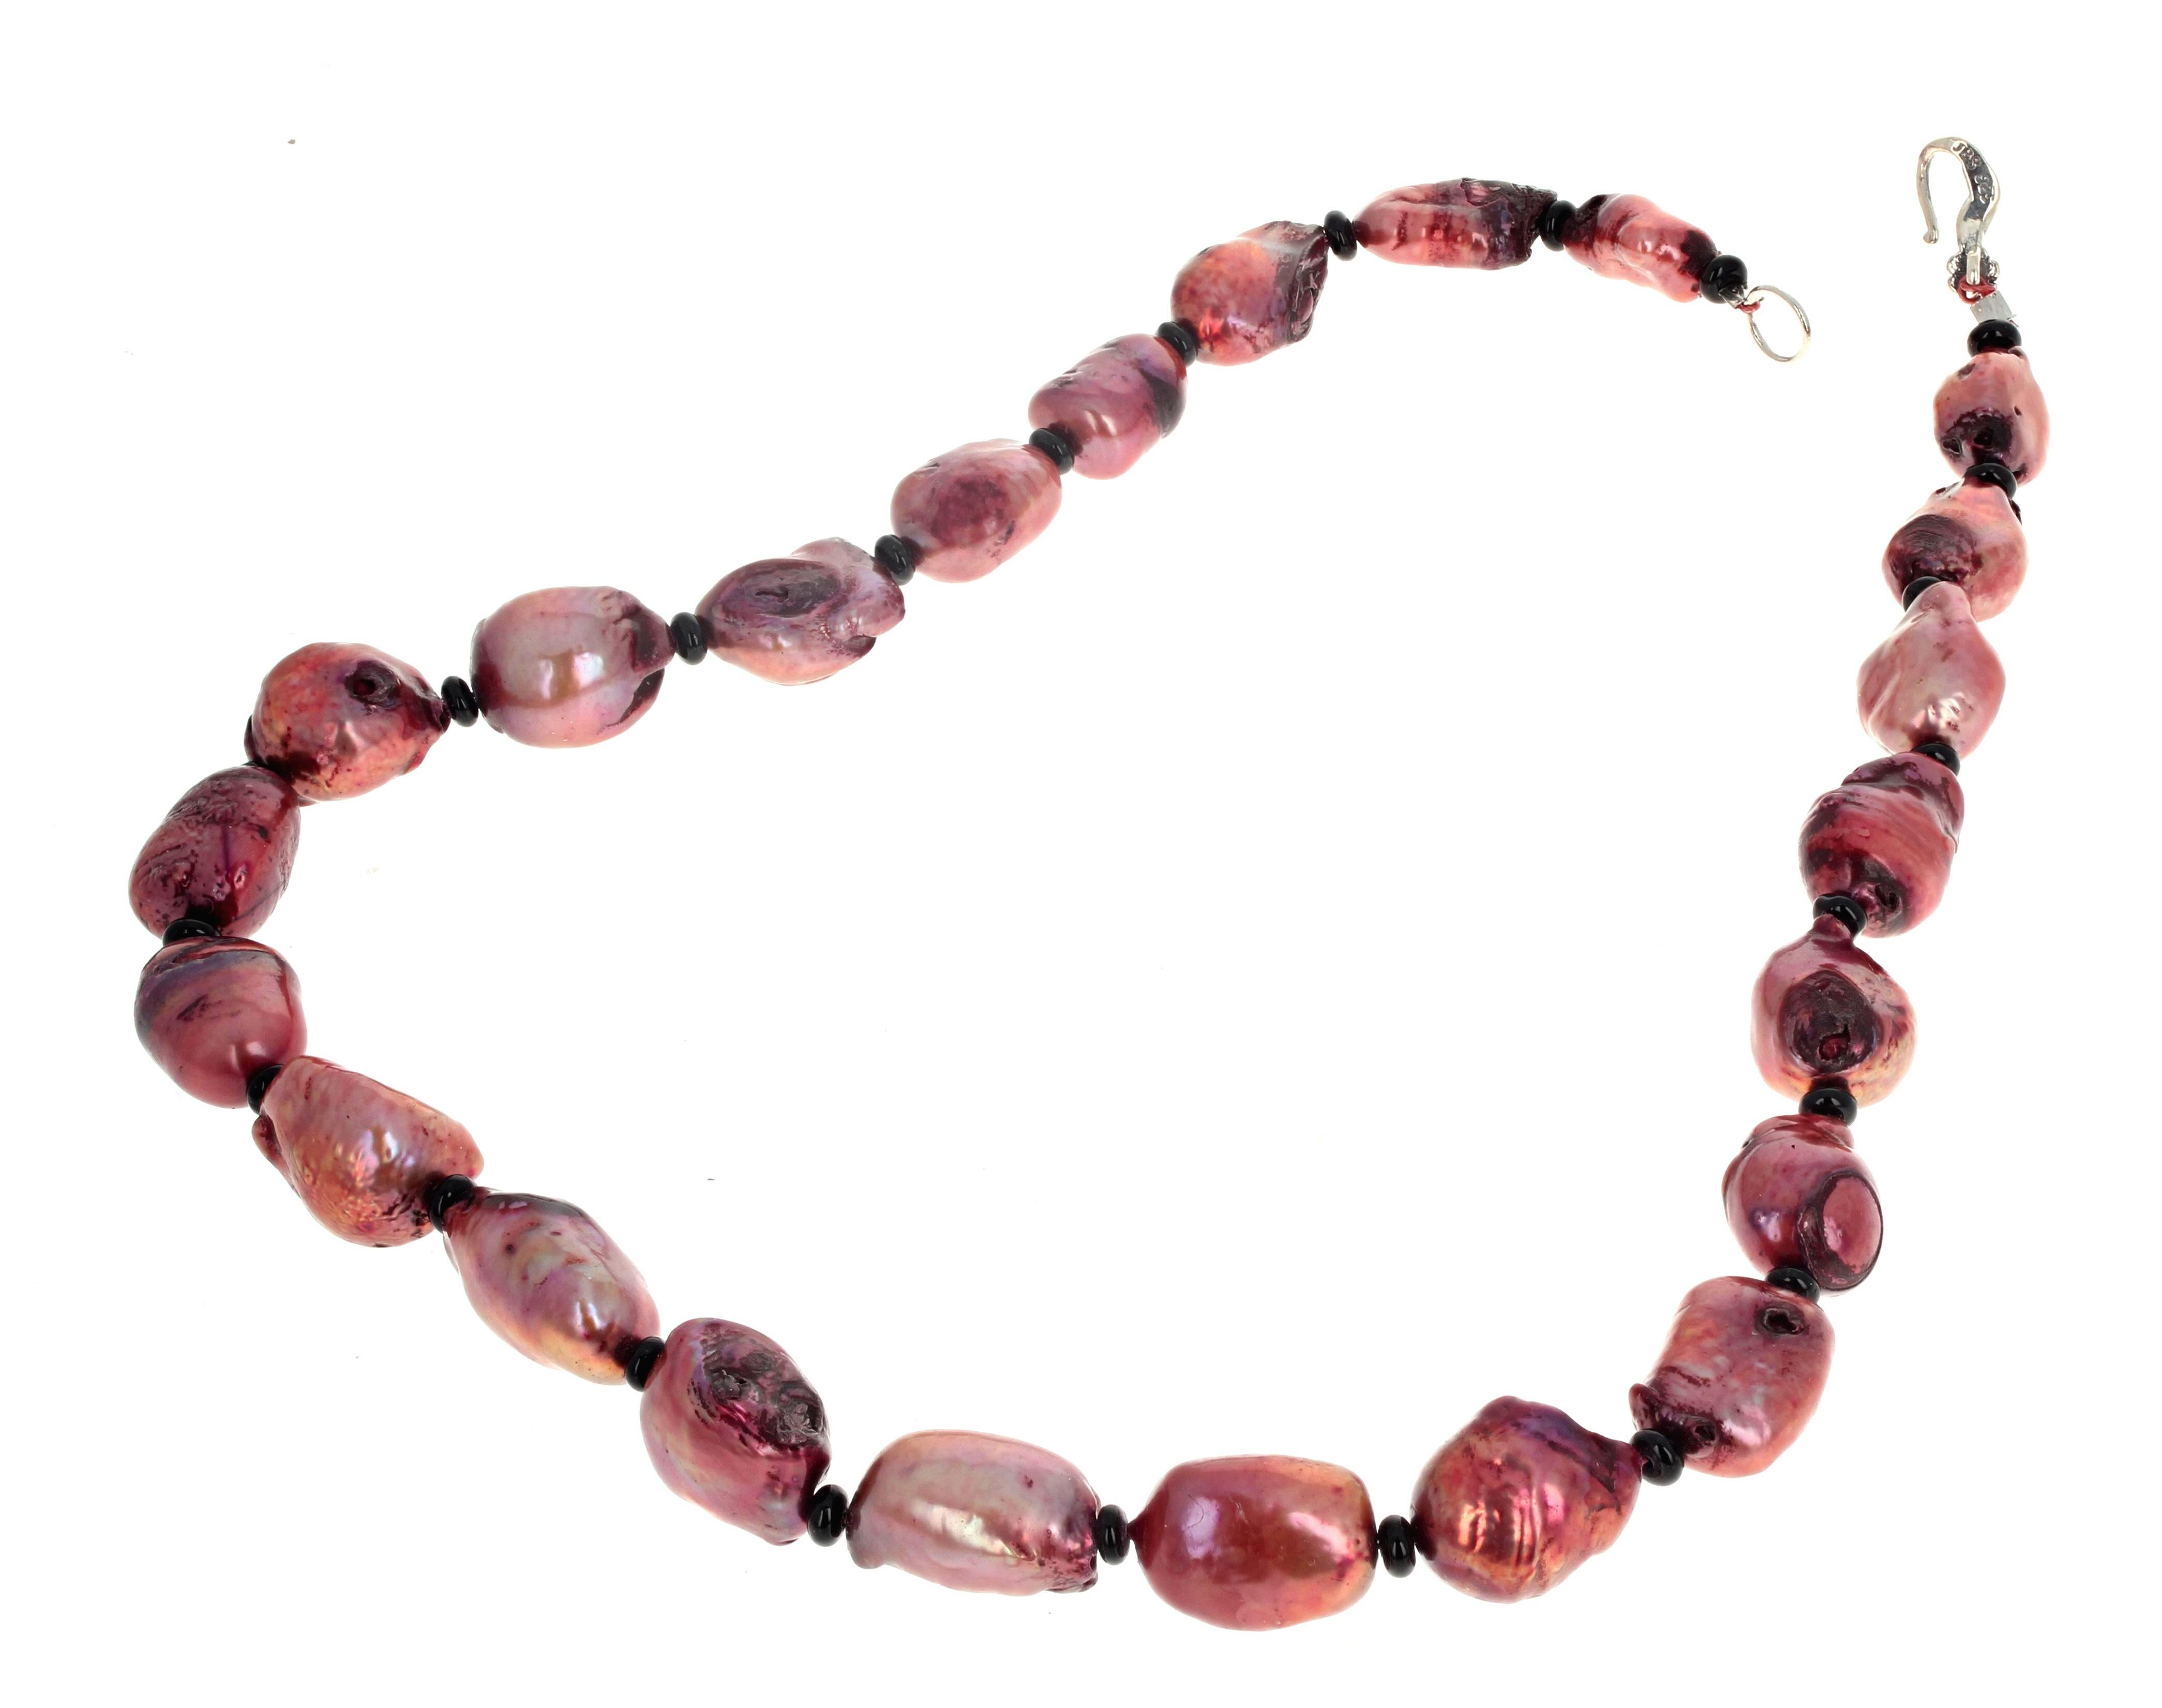 Uncut AJD Very Rare Glowing Coppery Pink Cultured Pearl Necklace For Sale